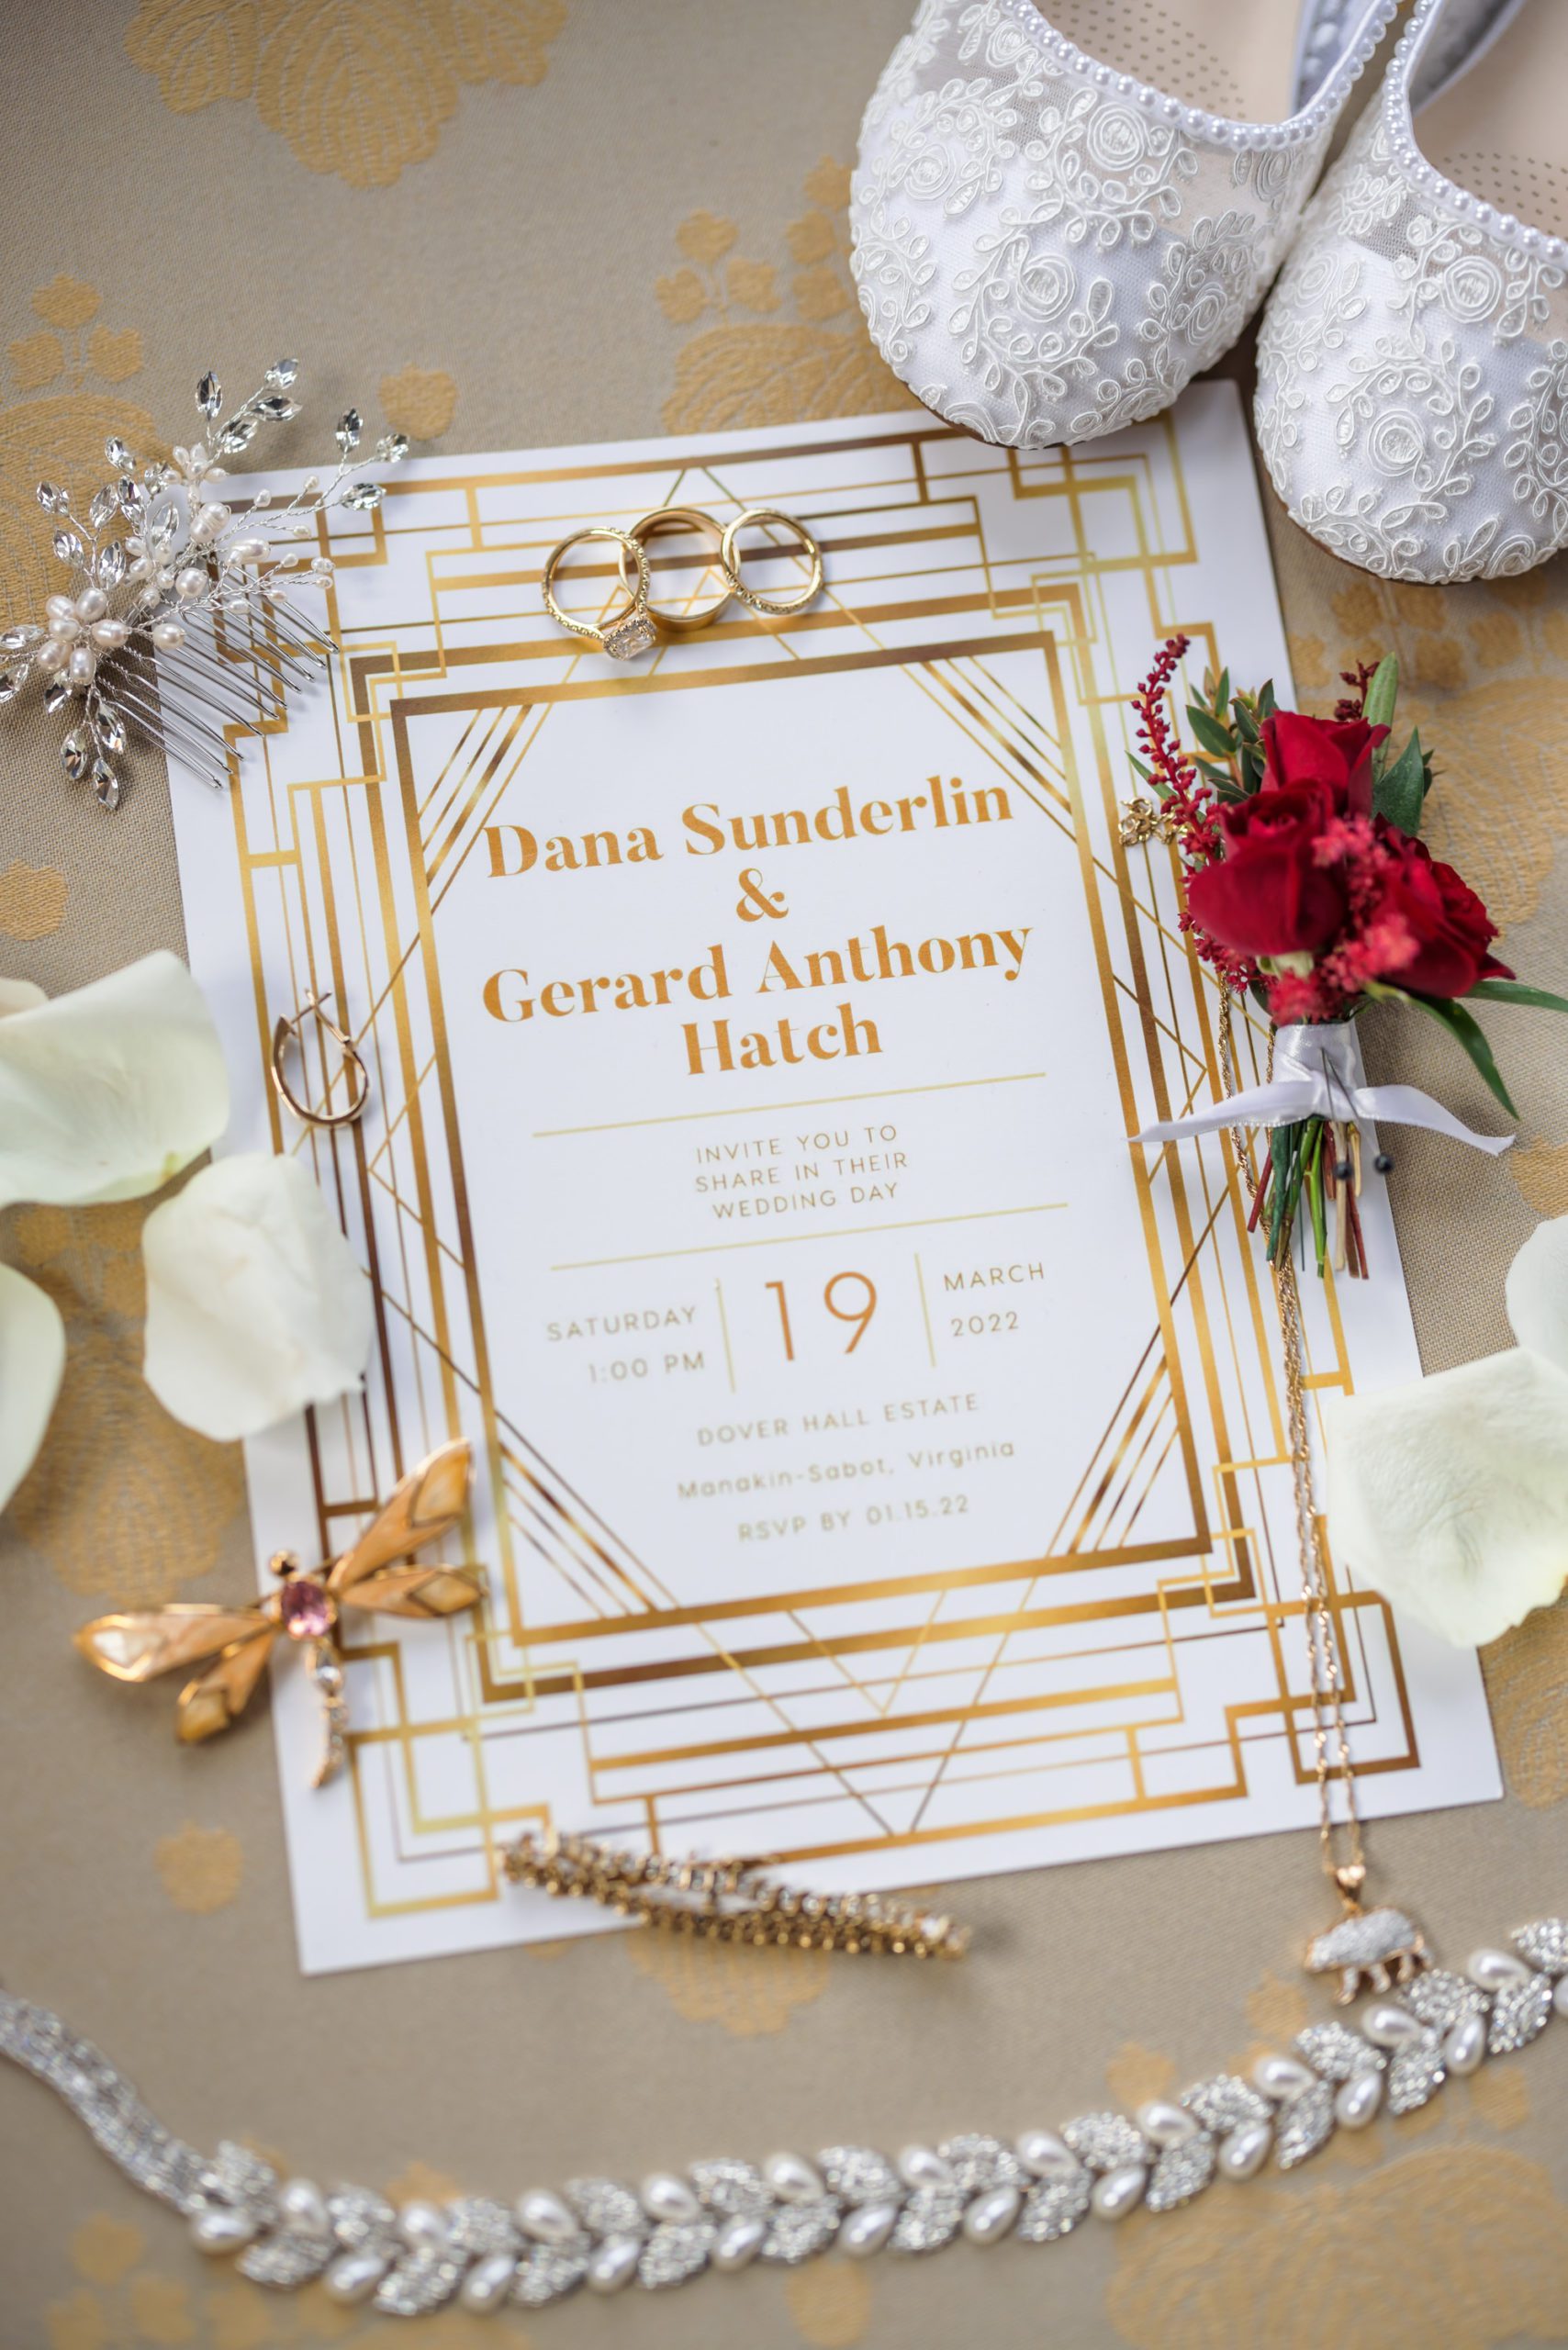 great gatsby inspired wedding invitation with bridal details at wedding flatlay for spring dover hall wedding